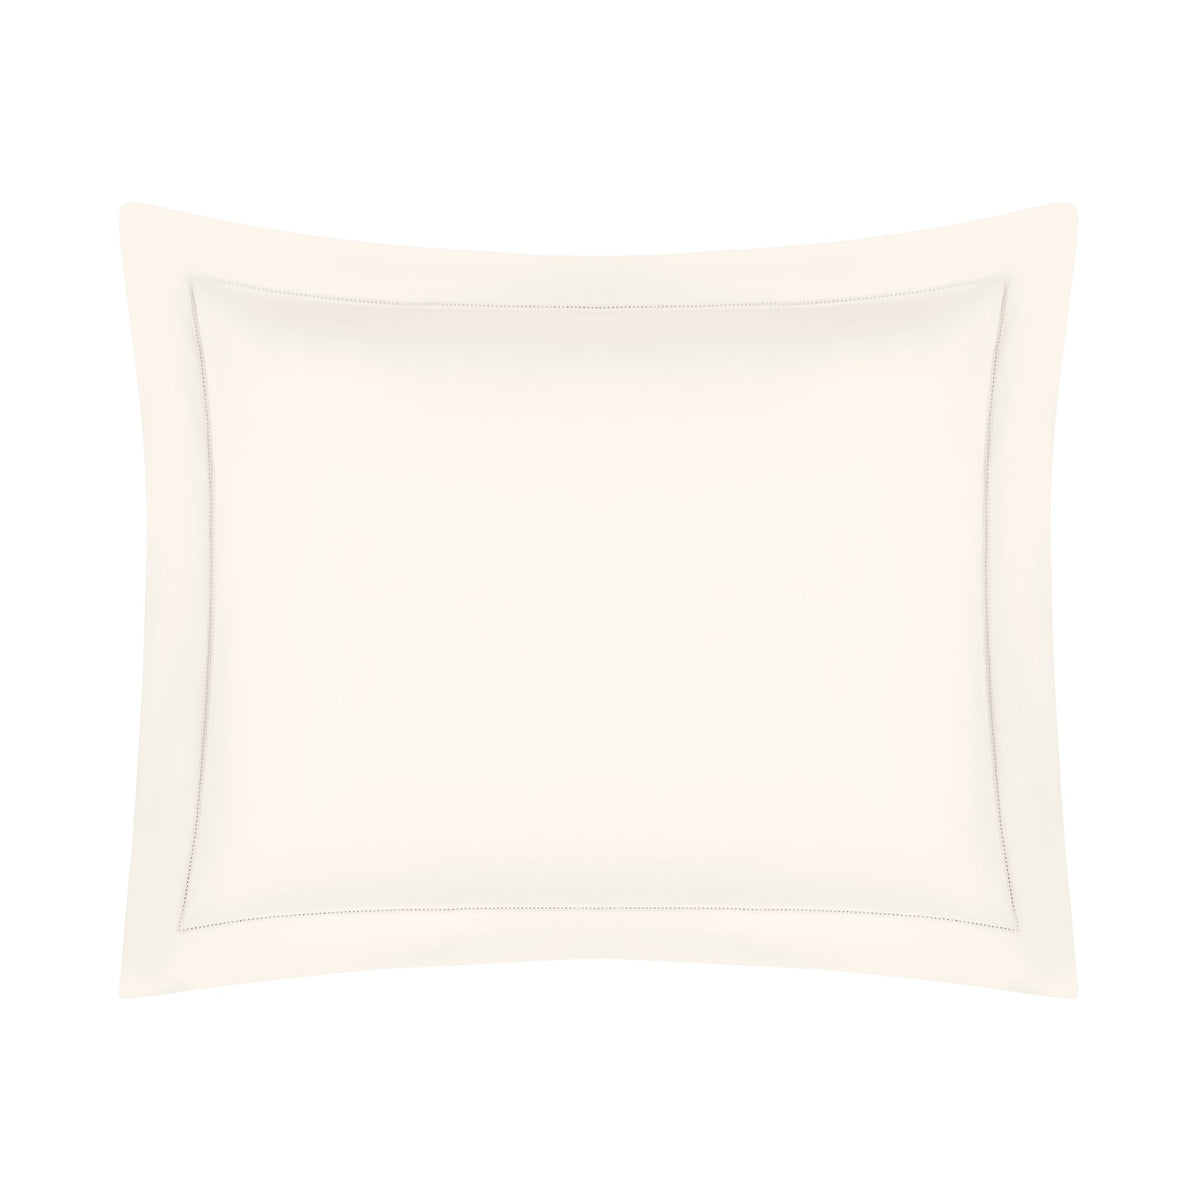 Sham of Home Treasures Perla Percale Bedding in Ivory Color